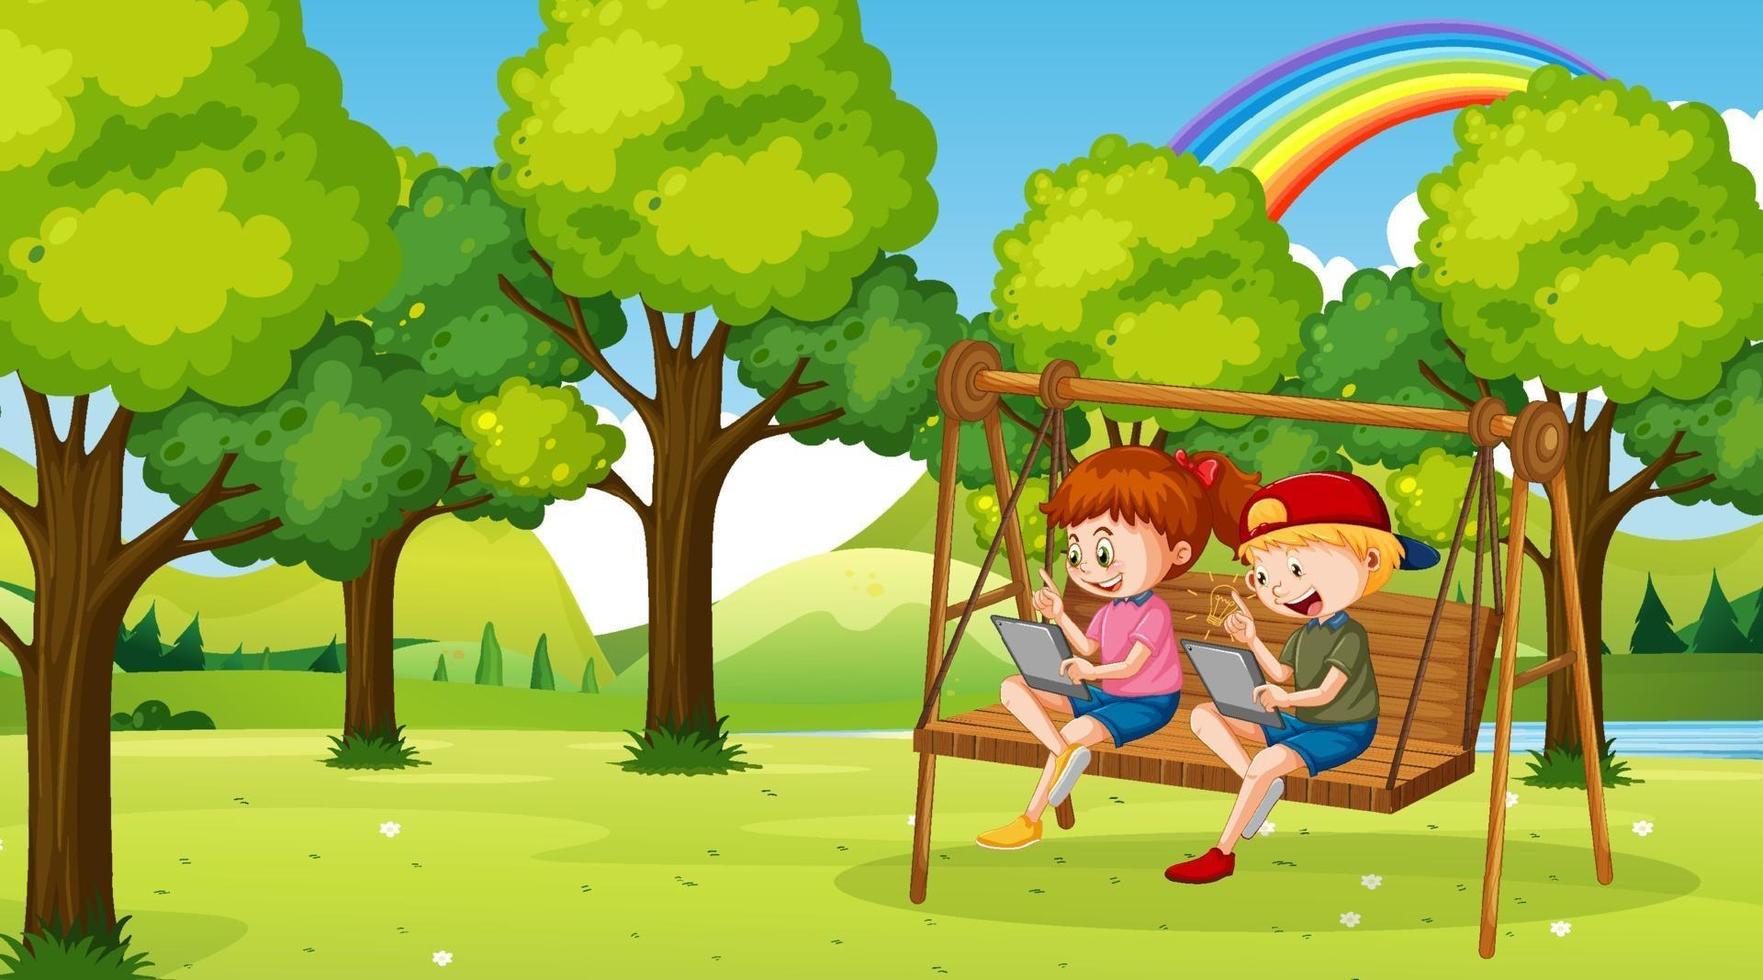 Kids leaning online with tablet on swing chair vector